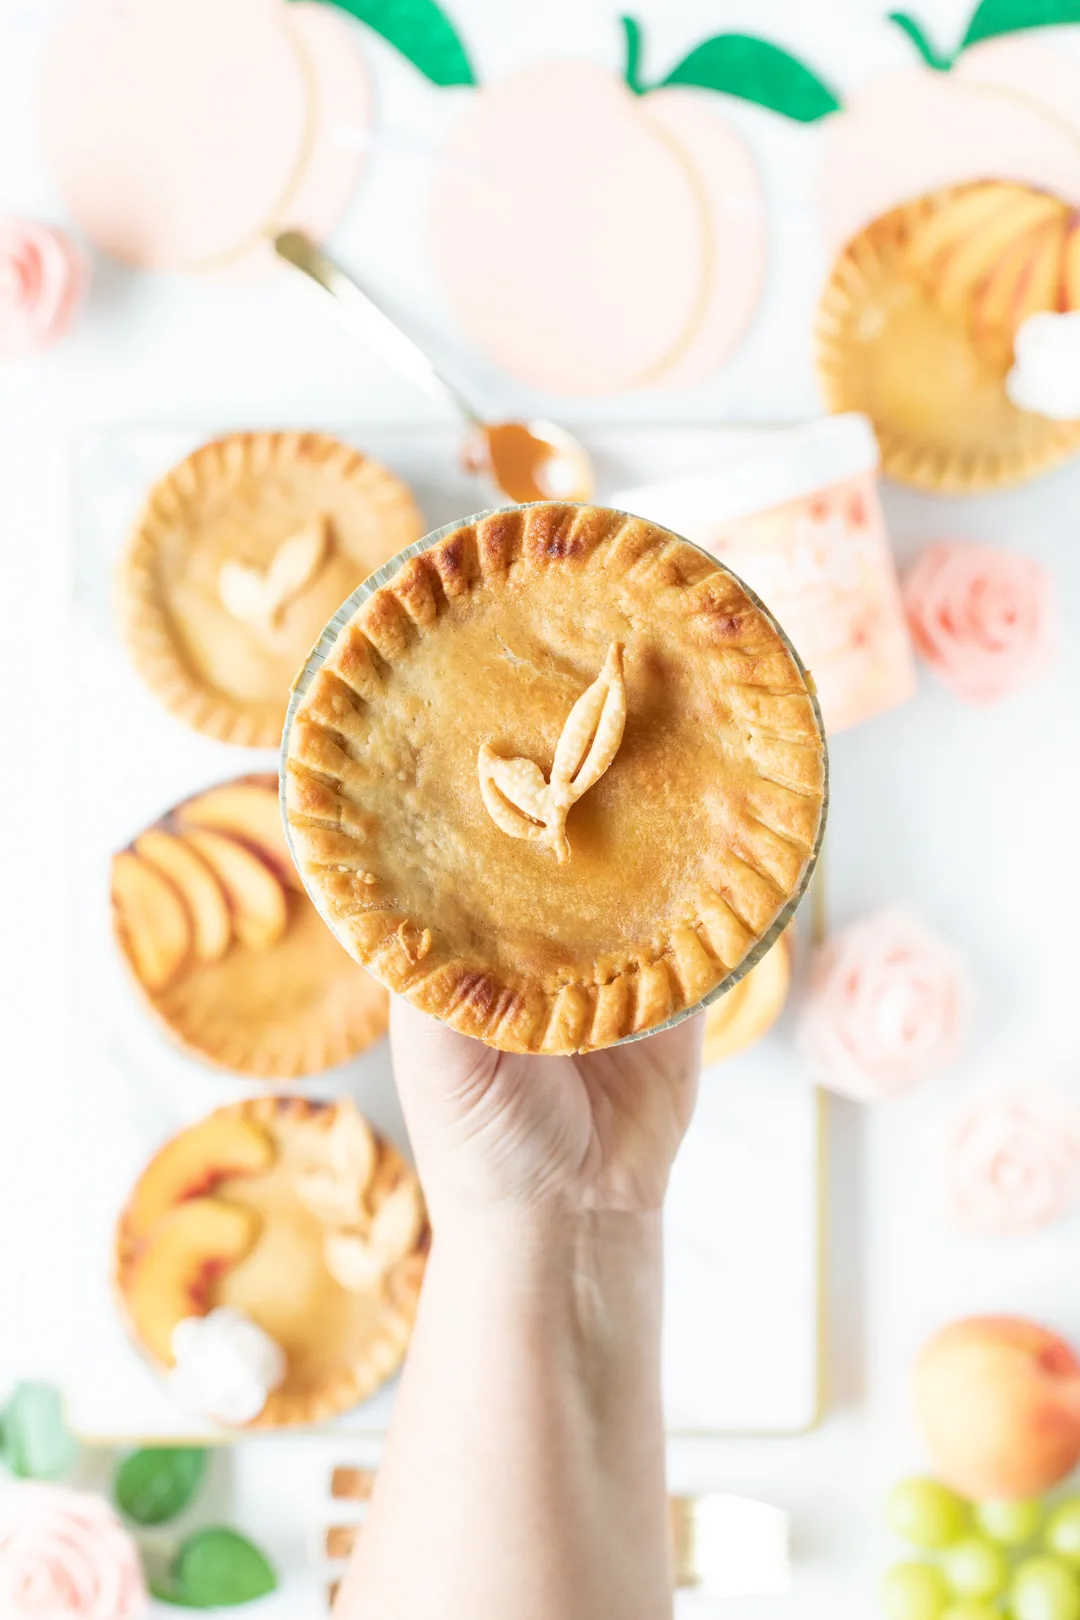 mini peach pie being held by woman's hand. Pretty leaf made out of pie crust on top.